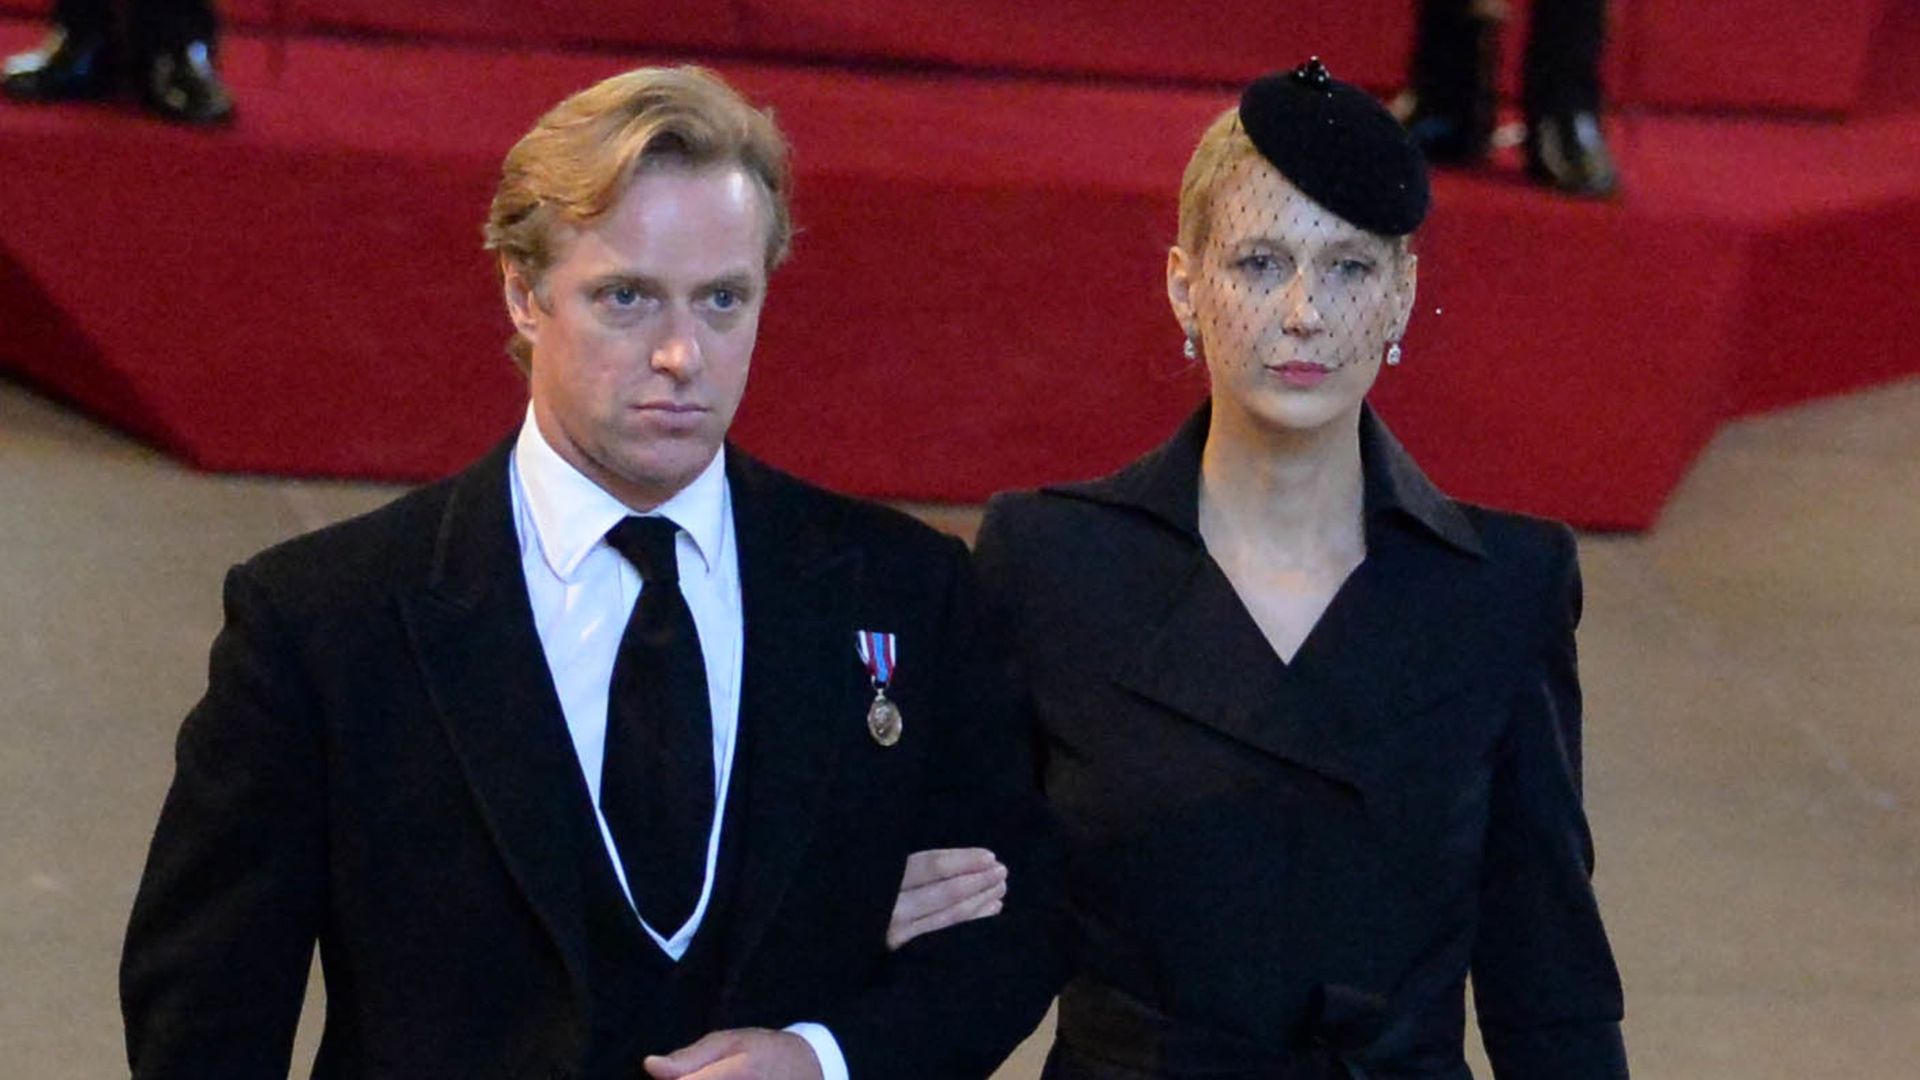 Lady Gabriella and Thomas Kingston at Queen's funeral